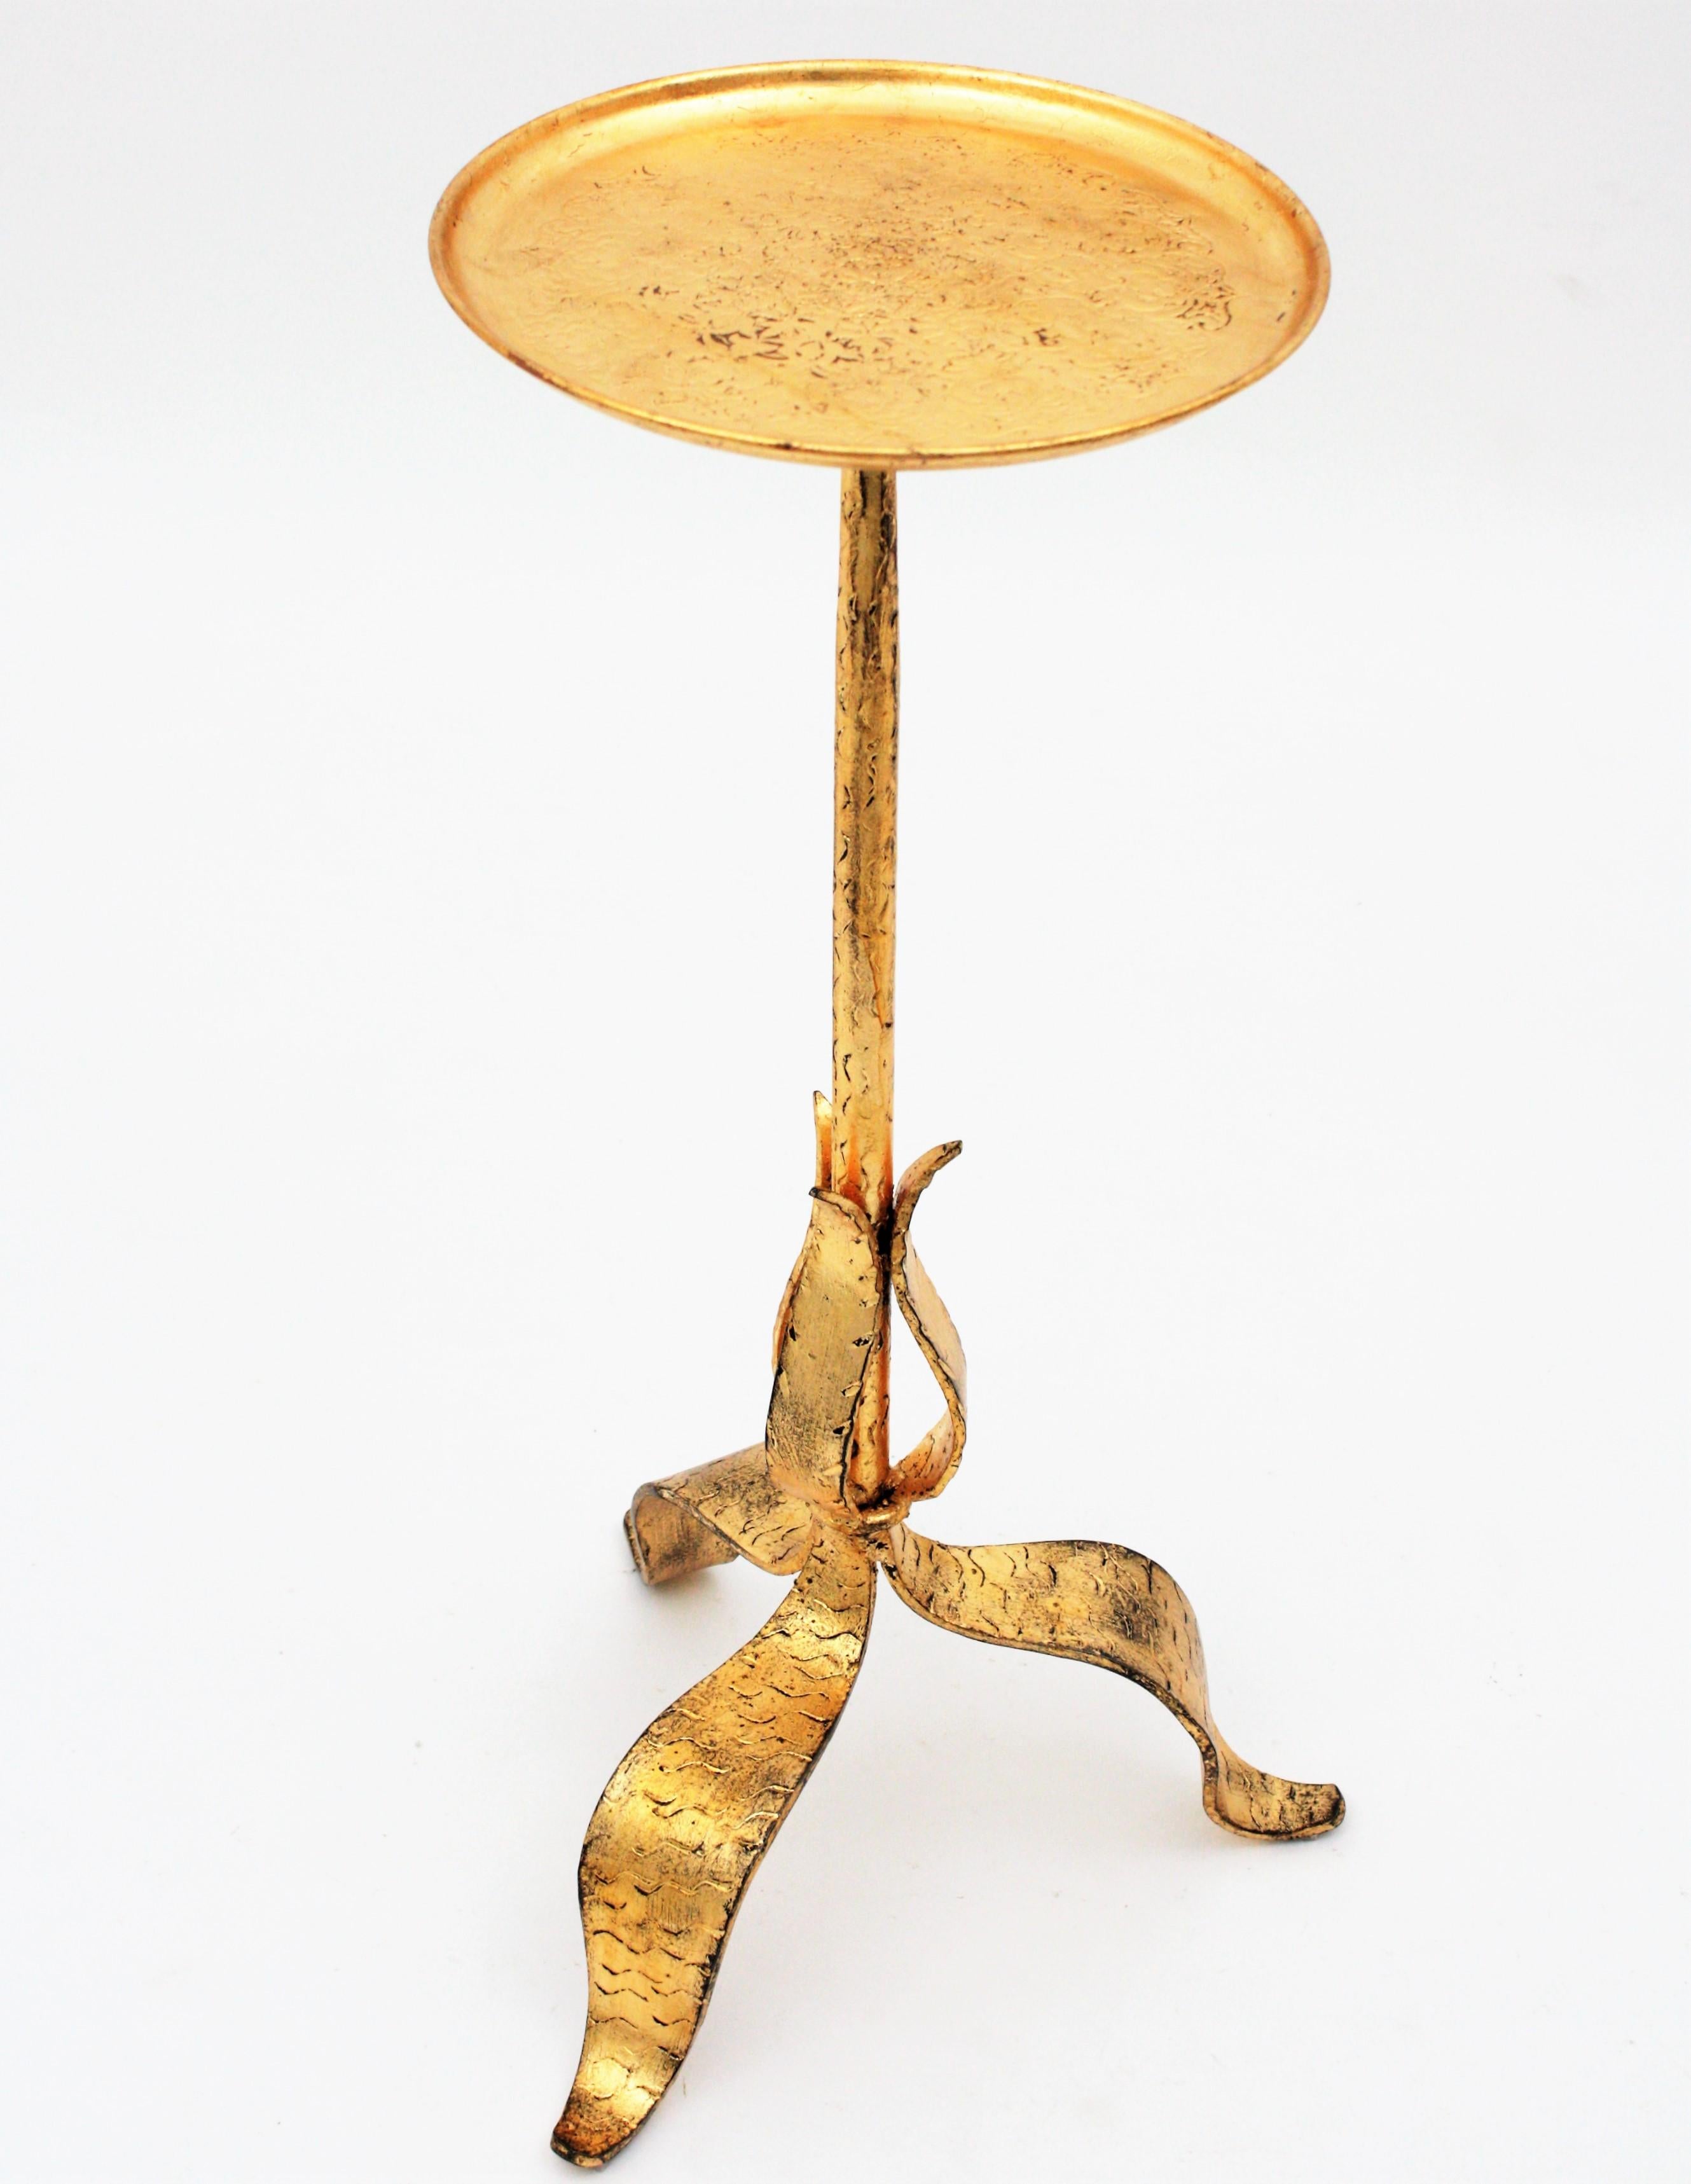 A hand-hammered iron drinks table or stand with a tripod leafed base and filigree adorned round top. France, 1930s.
This handcrafted table has Hammer marks decorating the base and is finished in gold leaf gilt. The top is richly decorated with